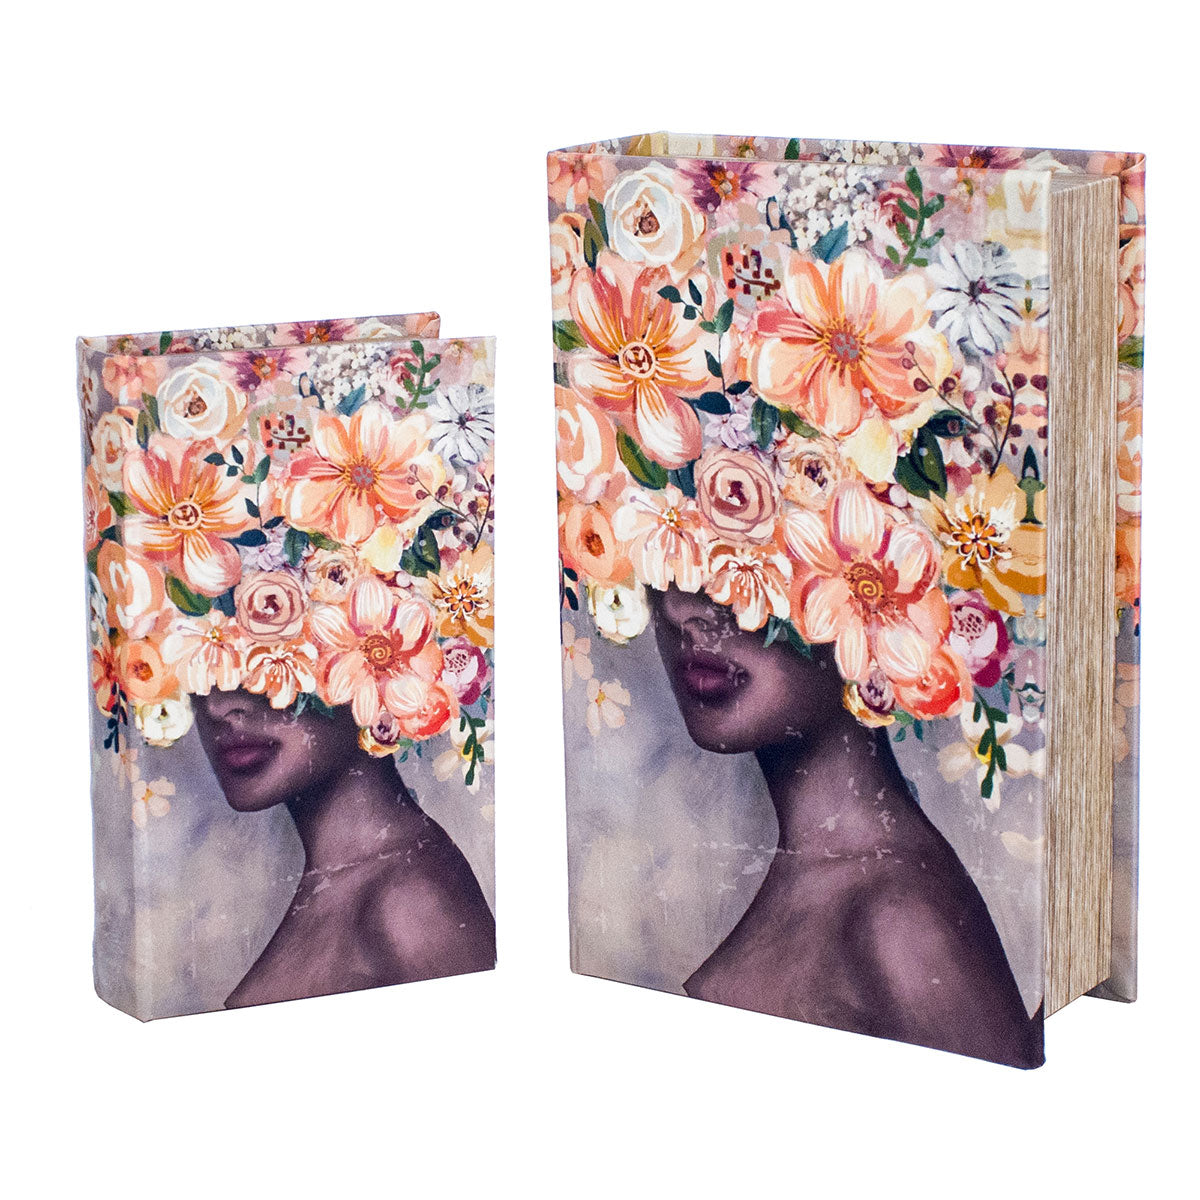 Woman with Flowers Book Box